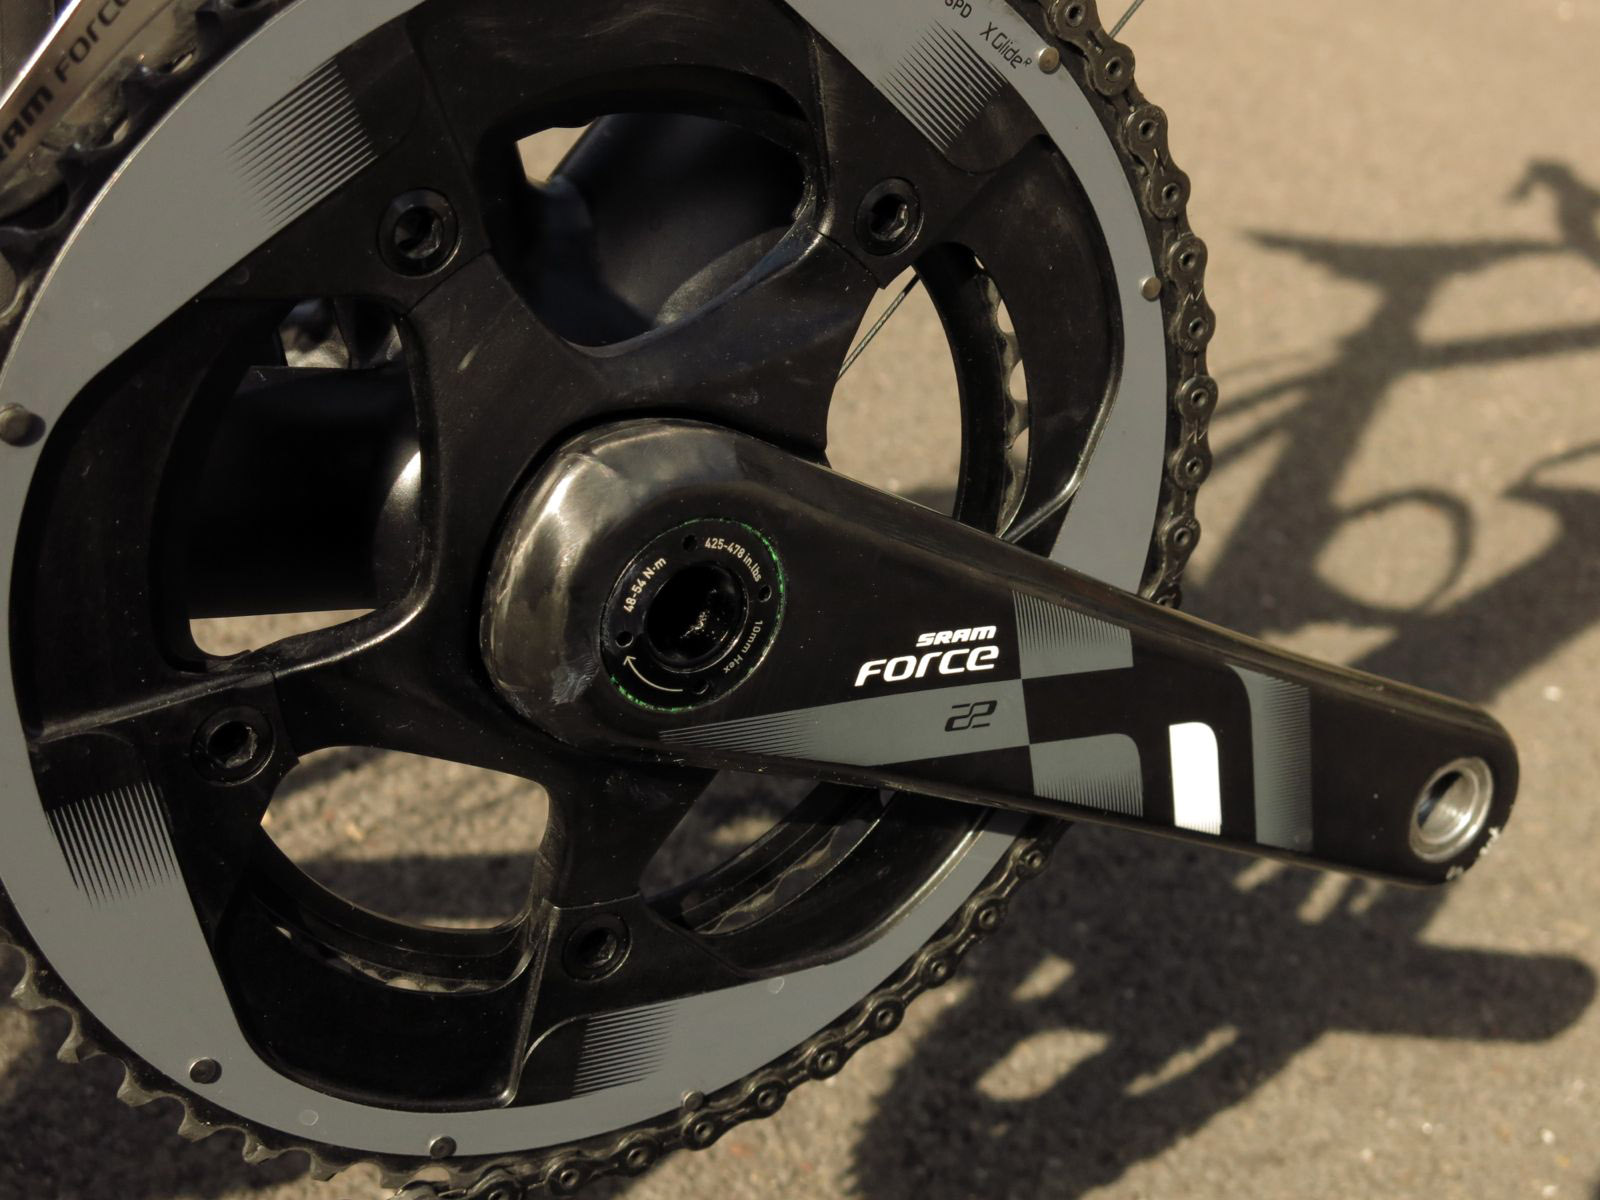 tang At blokere dybt Review: SRAM Force 22 groupset | road.cc